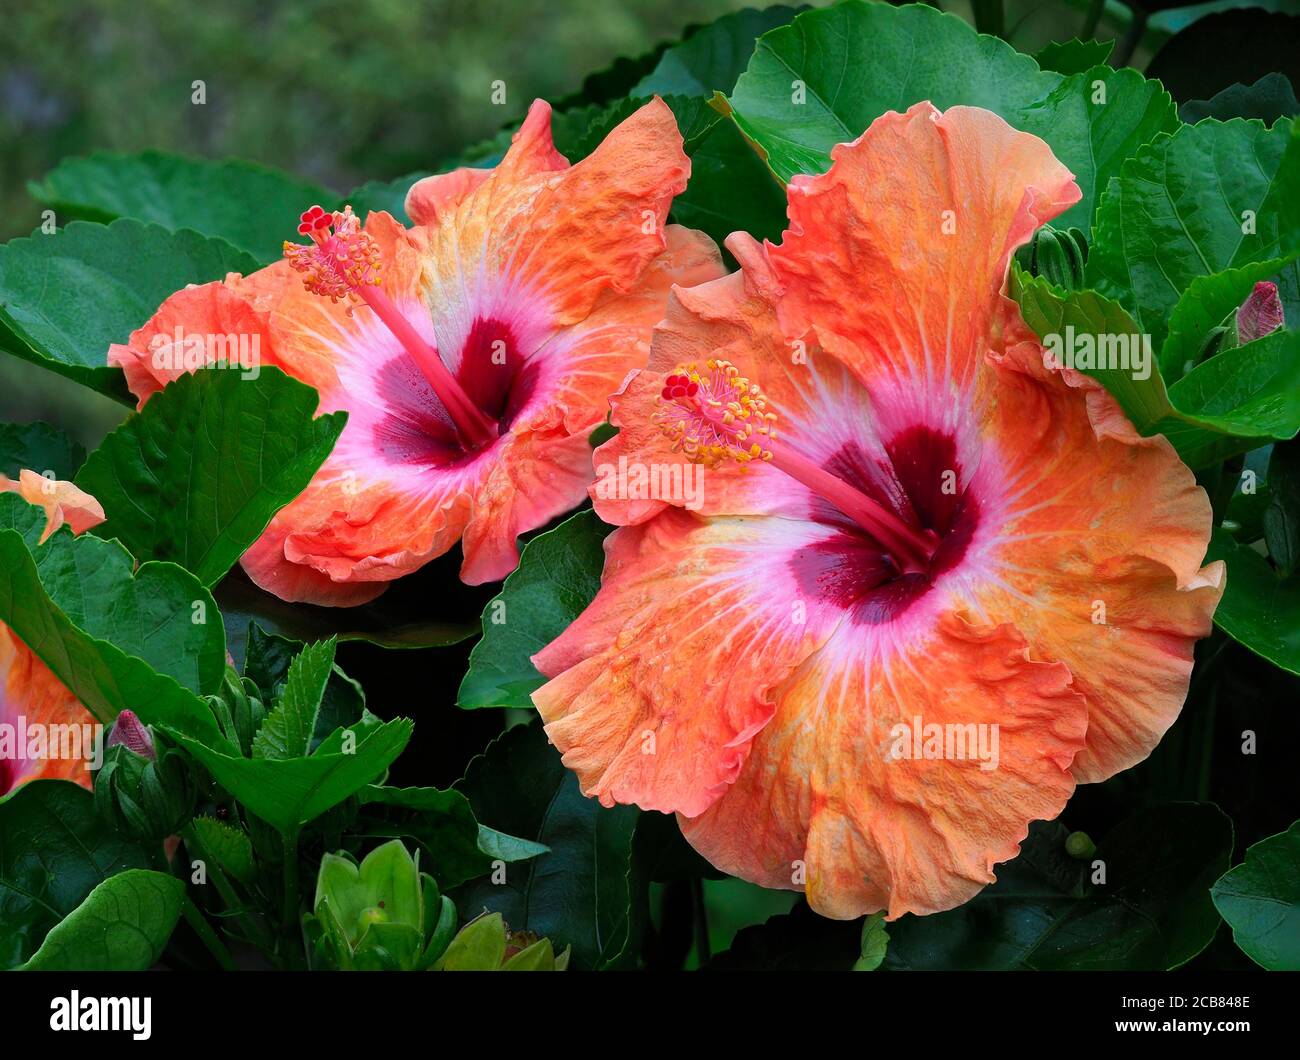 Closeup of a Focus Stacked Image of Orange Hibiscus after the Rain Stock Photo